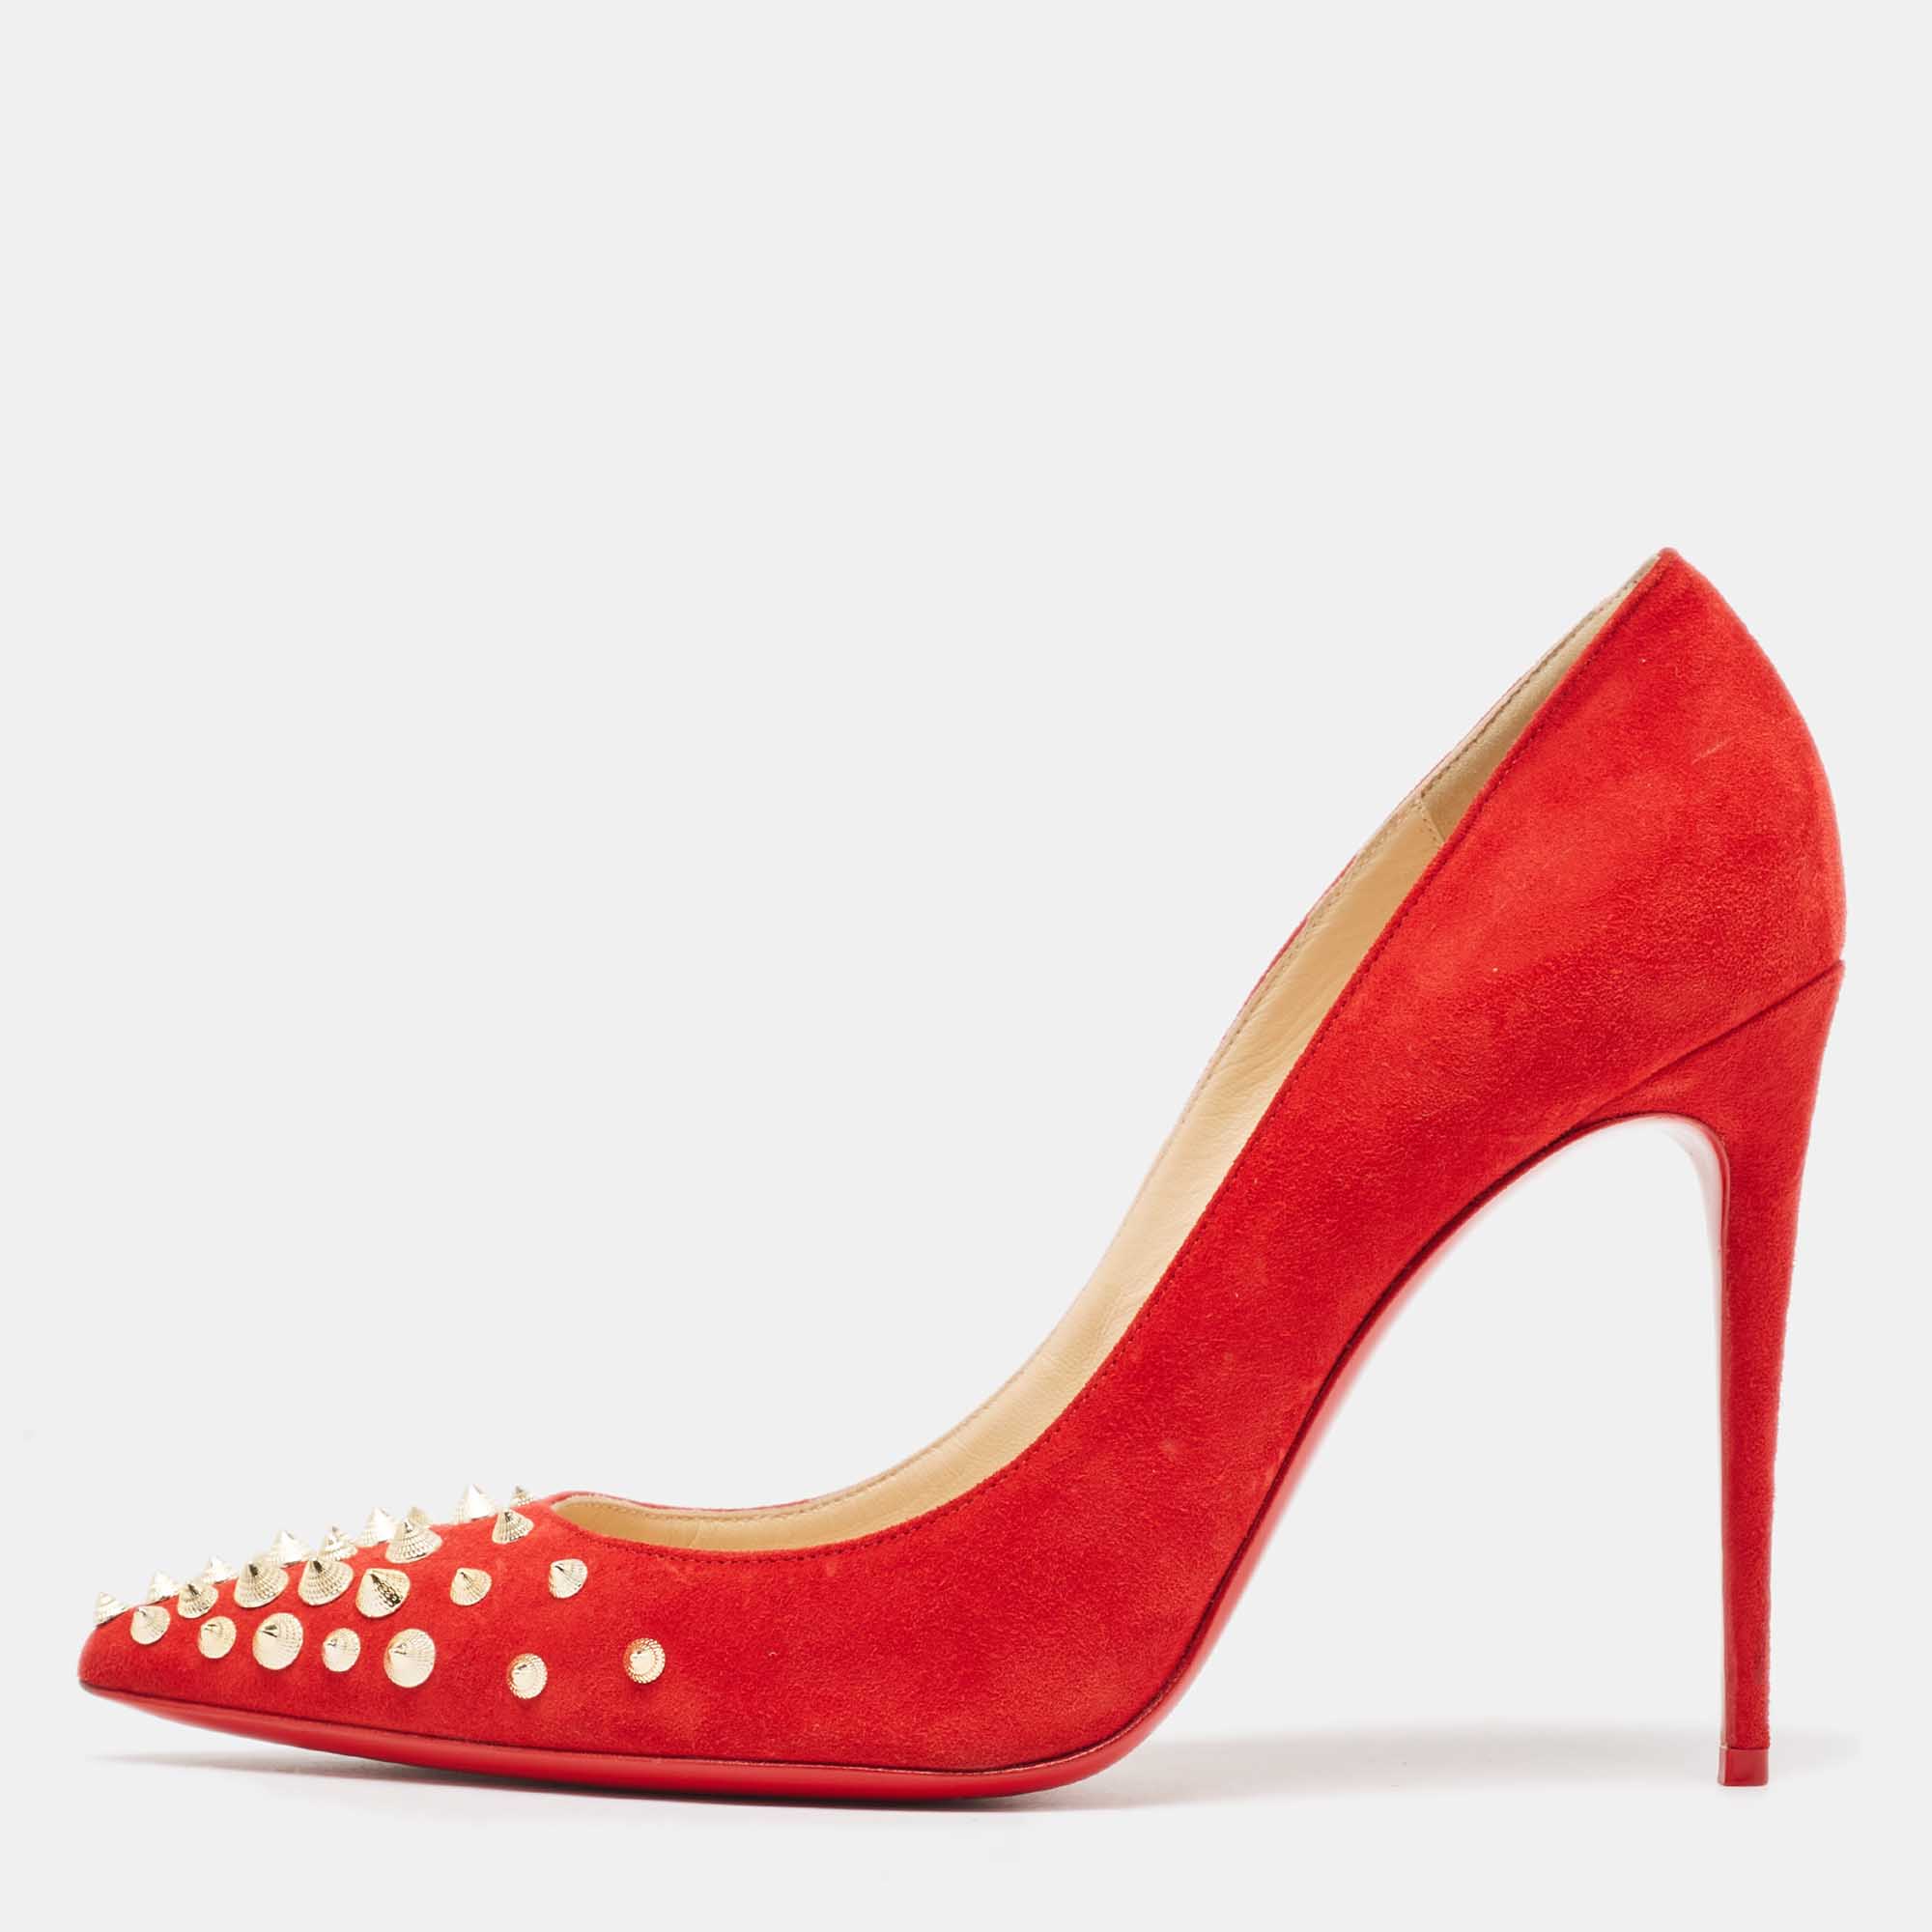 Pre-owned Christian Louboutin Red Suede Spikyshell Pumps Size 40